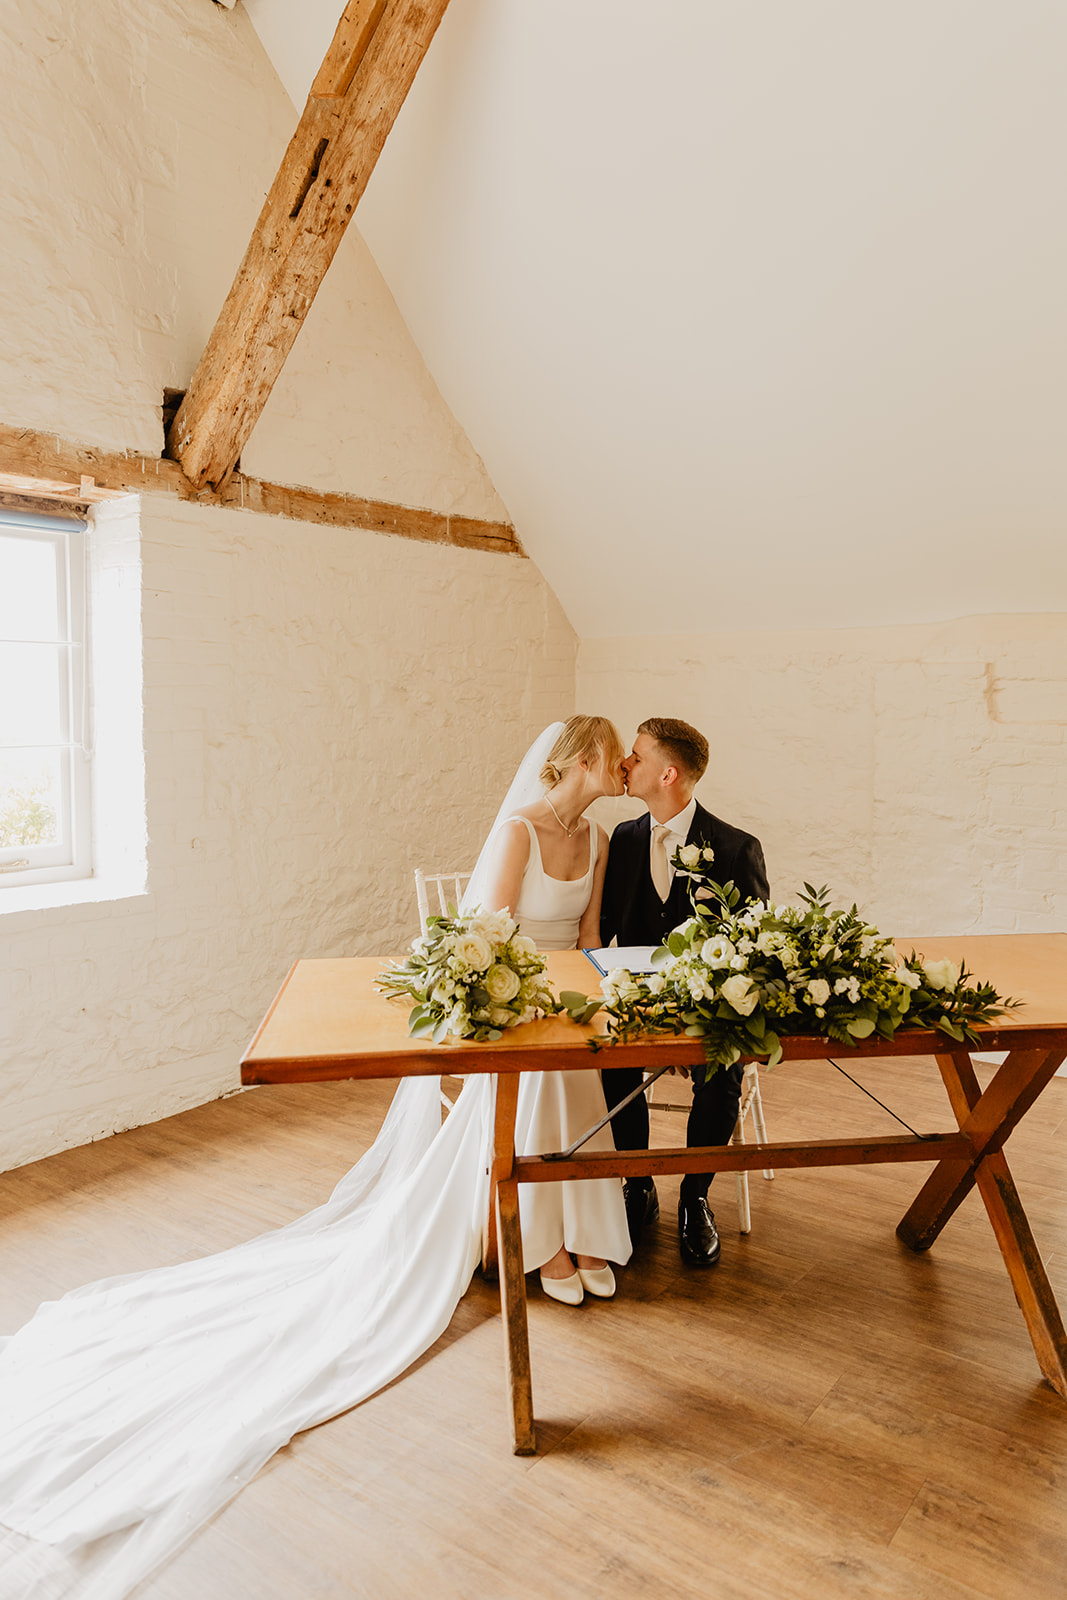 Bride and groom signing the register at a Bury Manor Barn Wedding in Sussex. Photographer OliveJoy Photography.